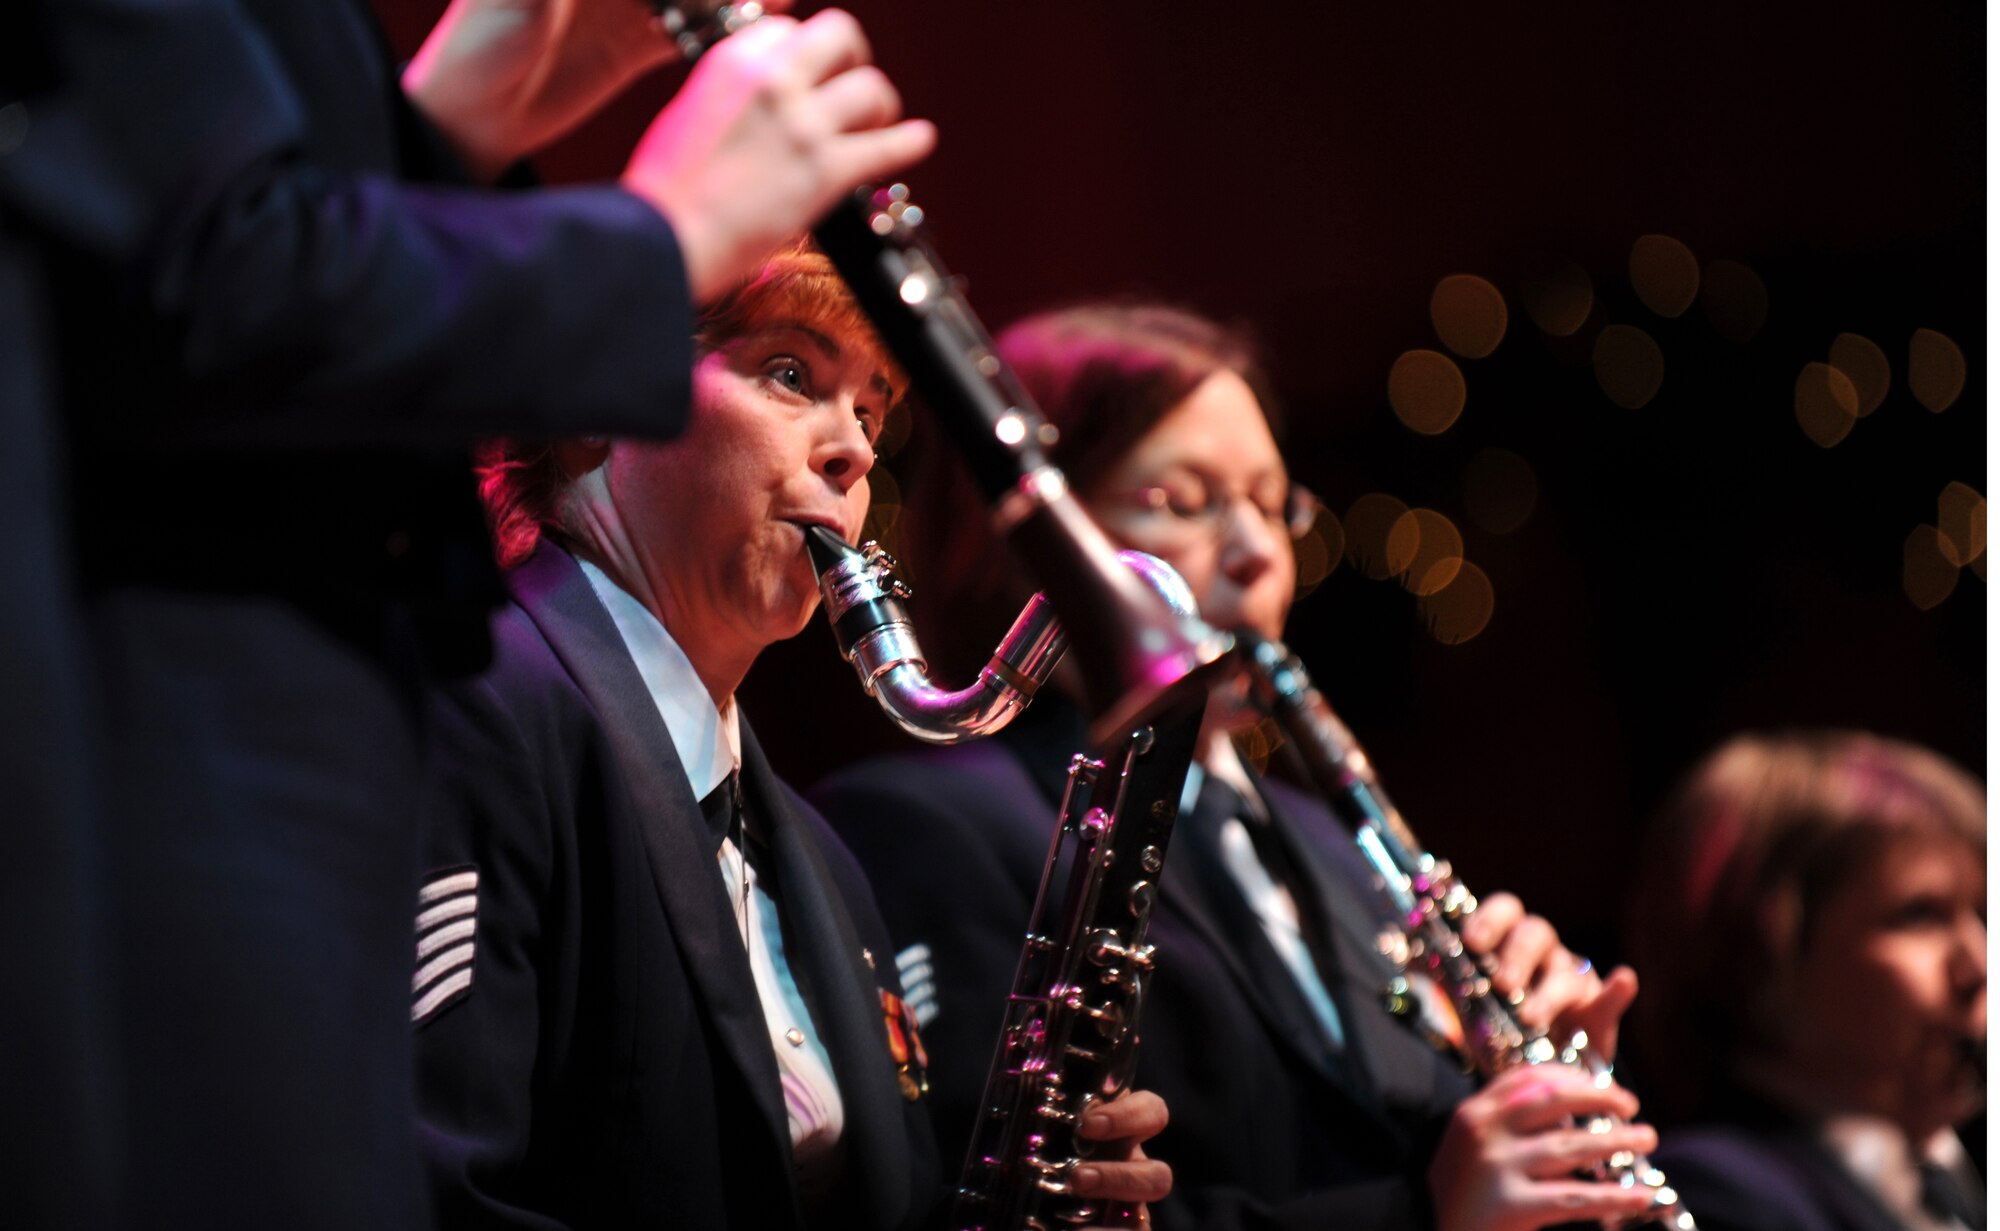 Tech. Sgt. Nicole Shininger, a clarinet player with the Heartland of America Band's New Horizons ensemble, performs "My Dreidle" as part of the annual holiday concert series held at the Holland Performing Arts Center Dec. 12.

U.S. Air Force Photo by Josh Plueger